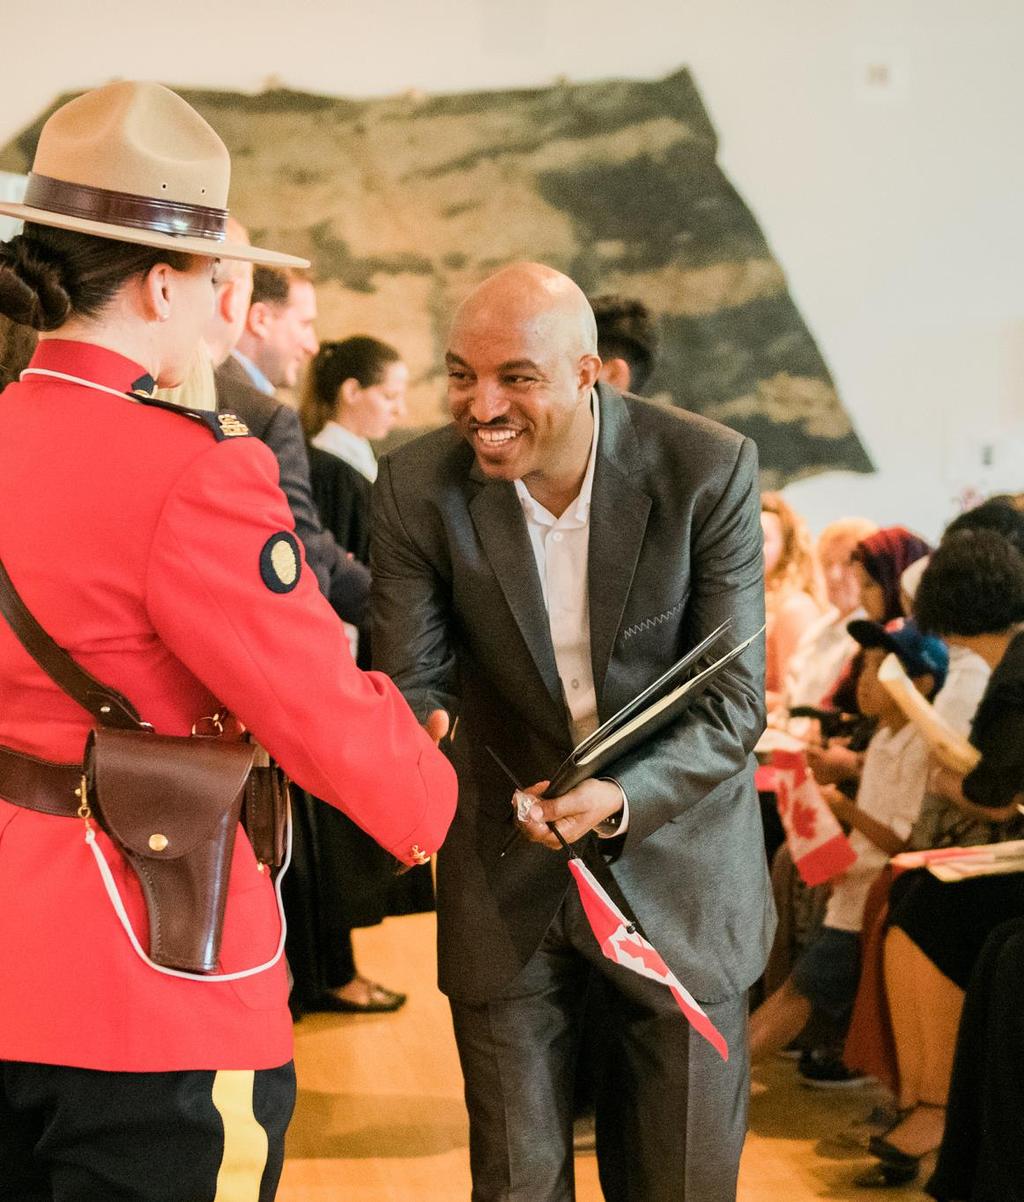 Institute for Canadian Citizenship Programs and special projects that inspire inclusion, create opportunities to connect, and encourage active citizenship.